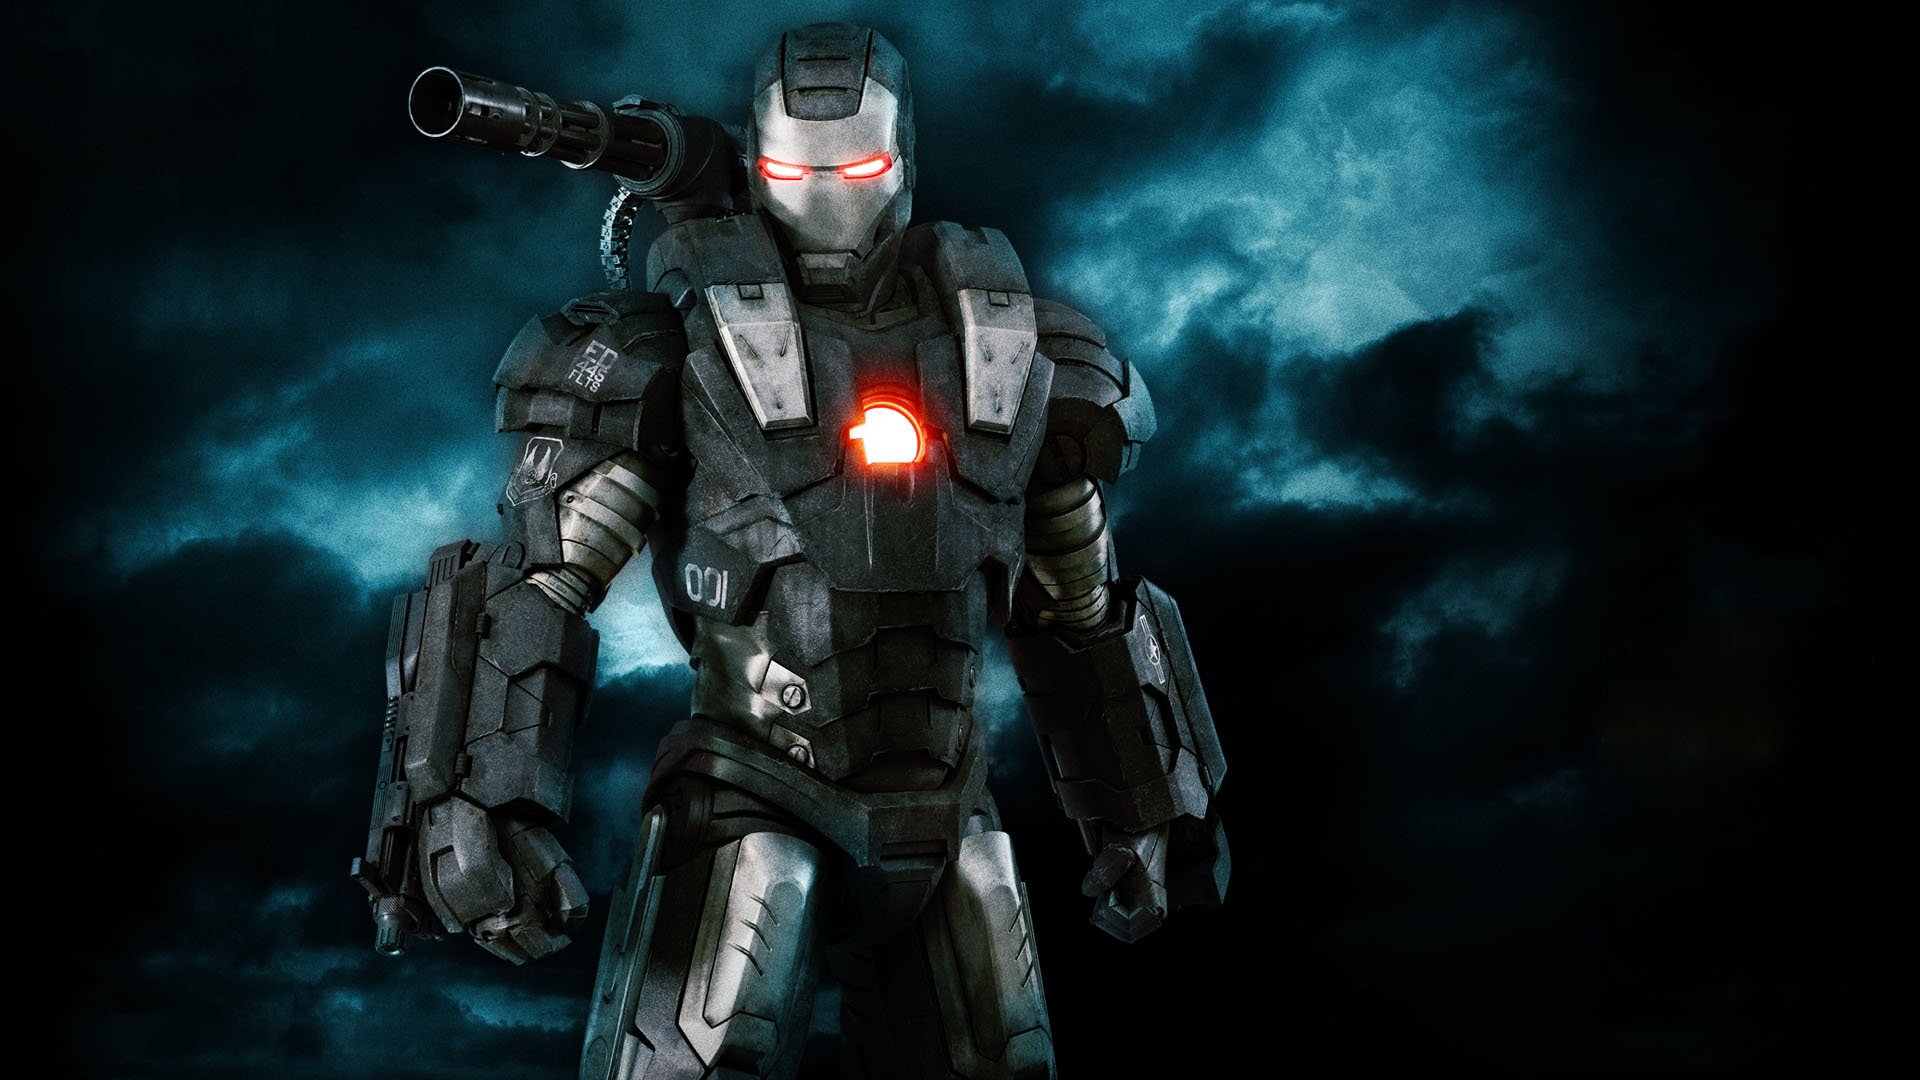 Cool Pictures Iron Man 3 HD Wallpaper Cool Pictures Iron Man 3